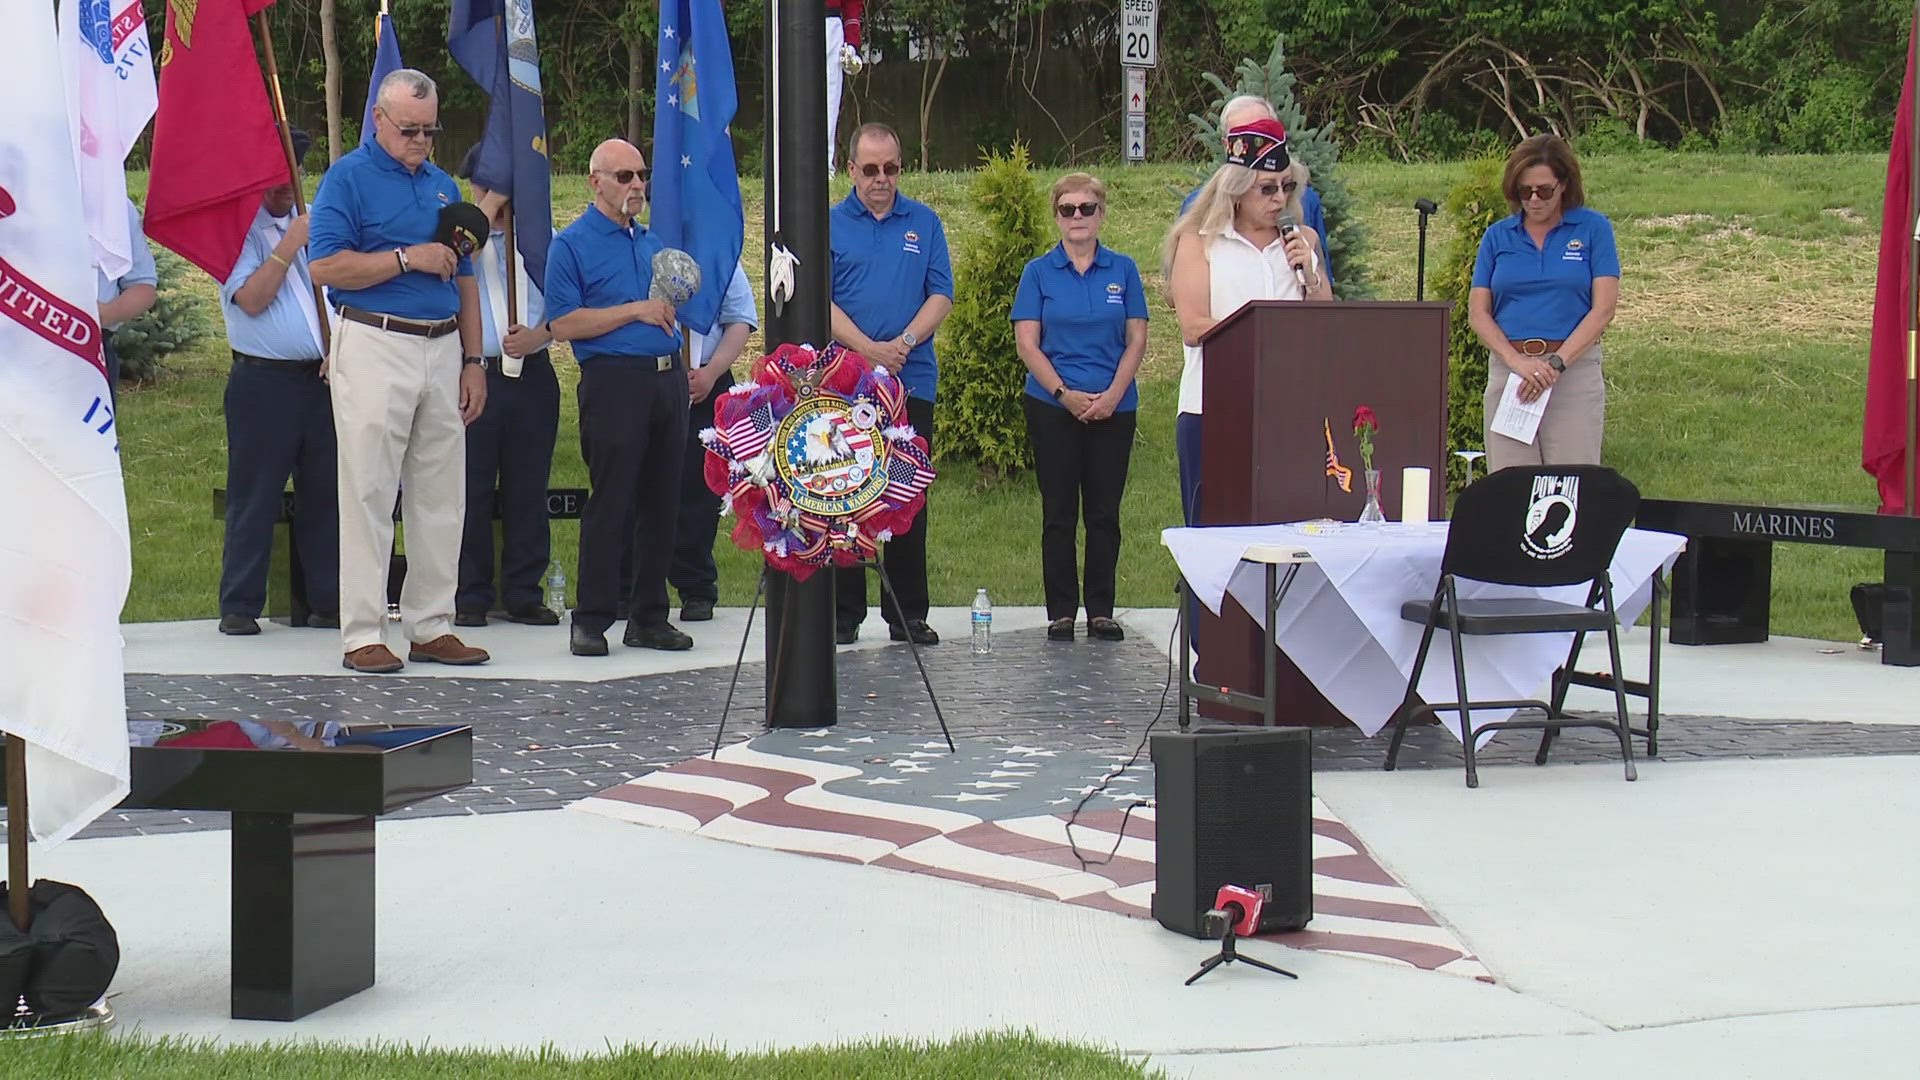 The monument took three years to build. Members of the Arnold Veterans Commission were behind the project and held fundraisers to help pay for the memorial.